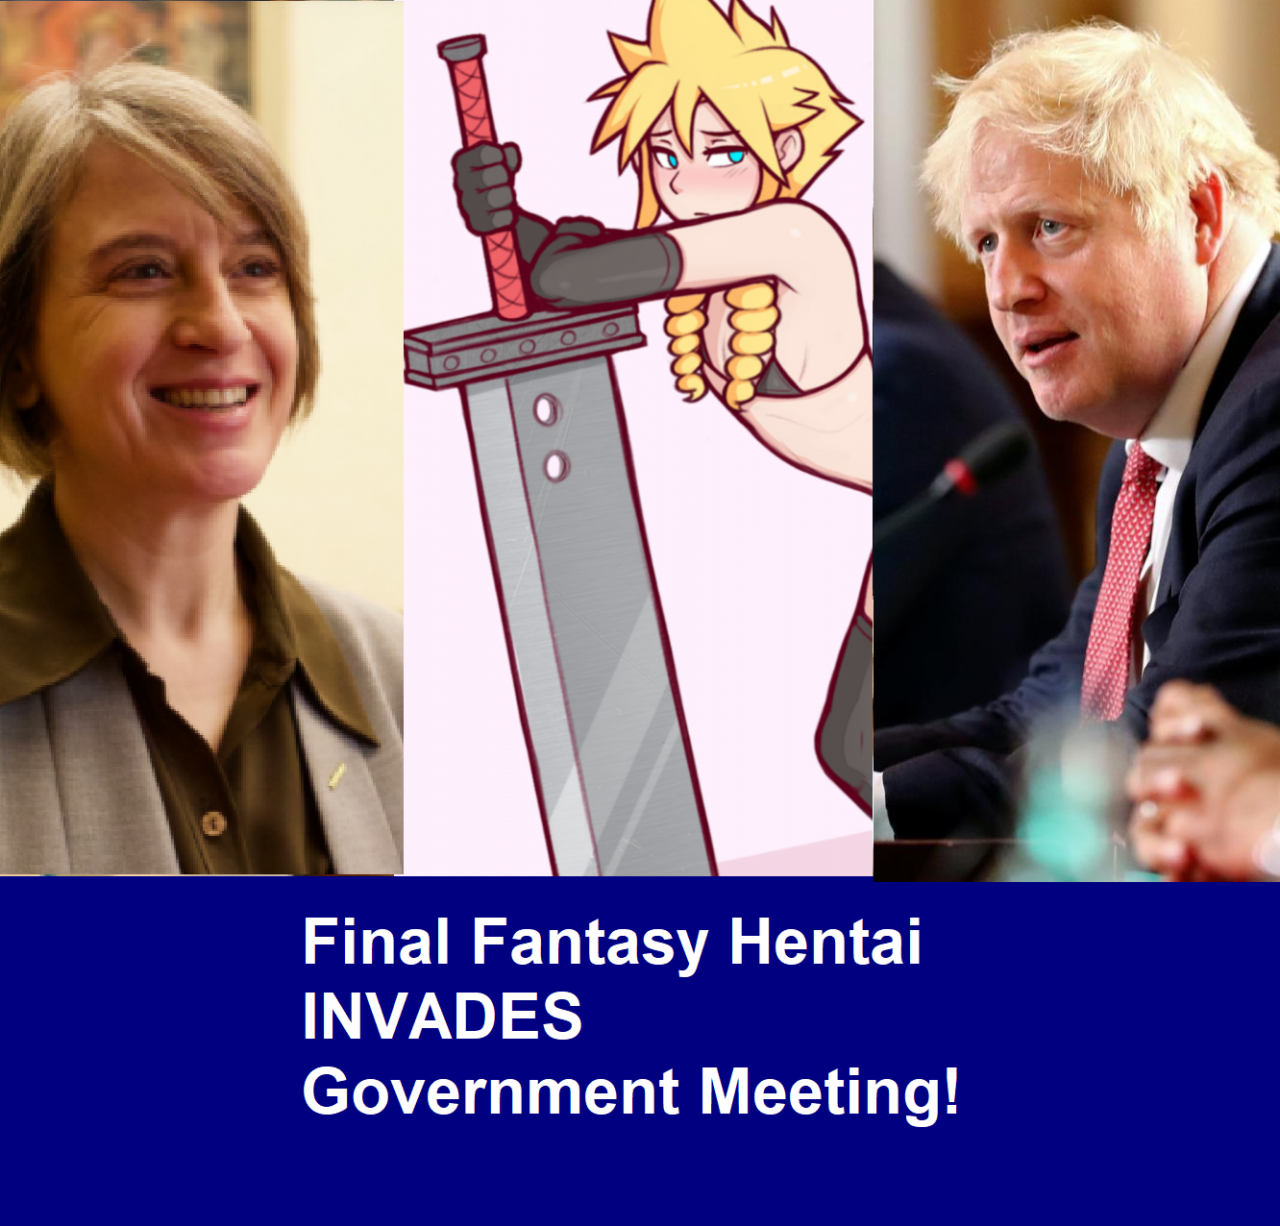 Final-Fantasy-Hentai-government-meeting-tn-1-1280x1226.png